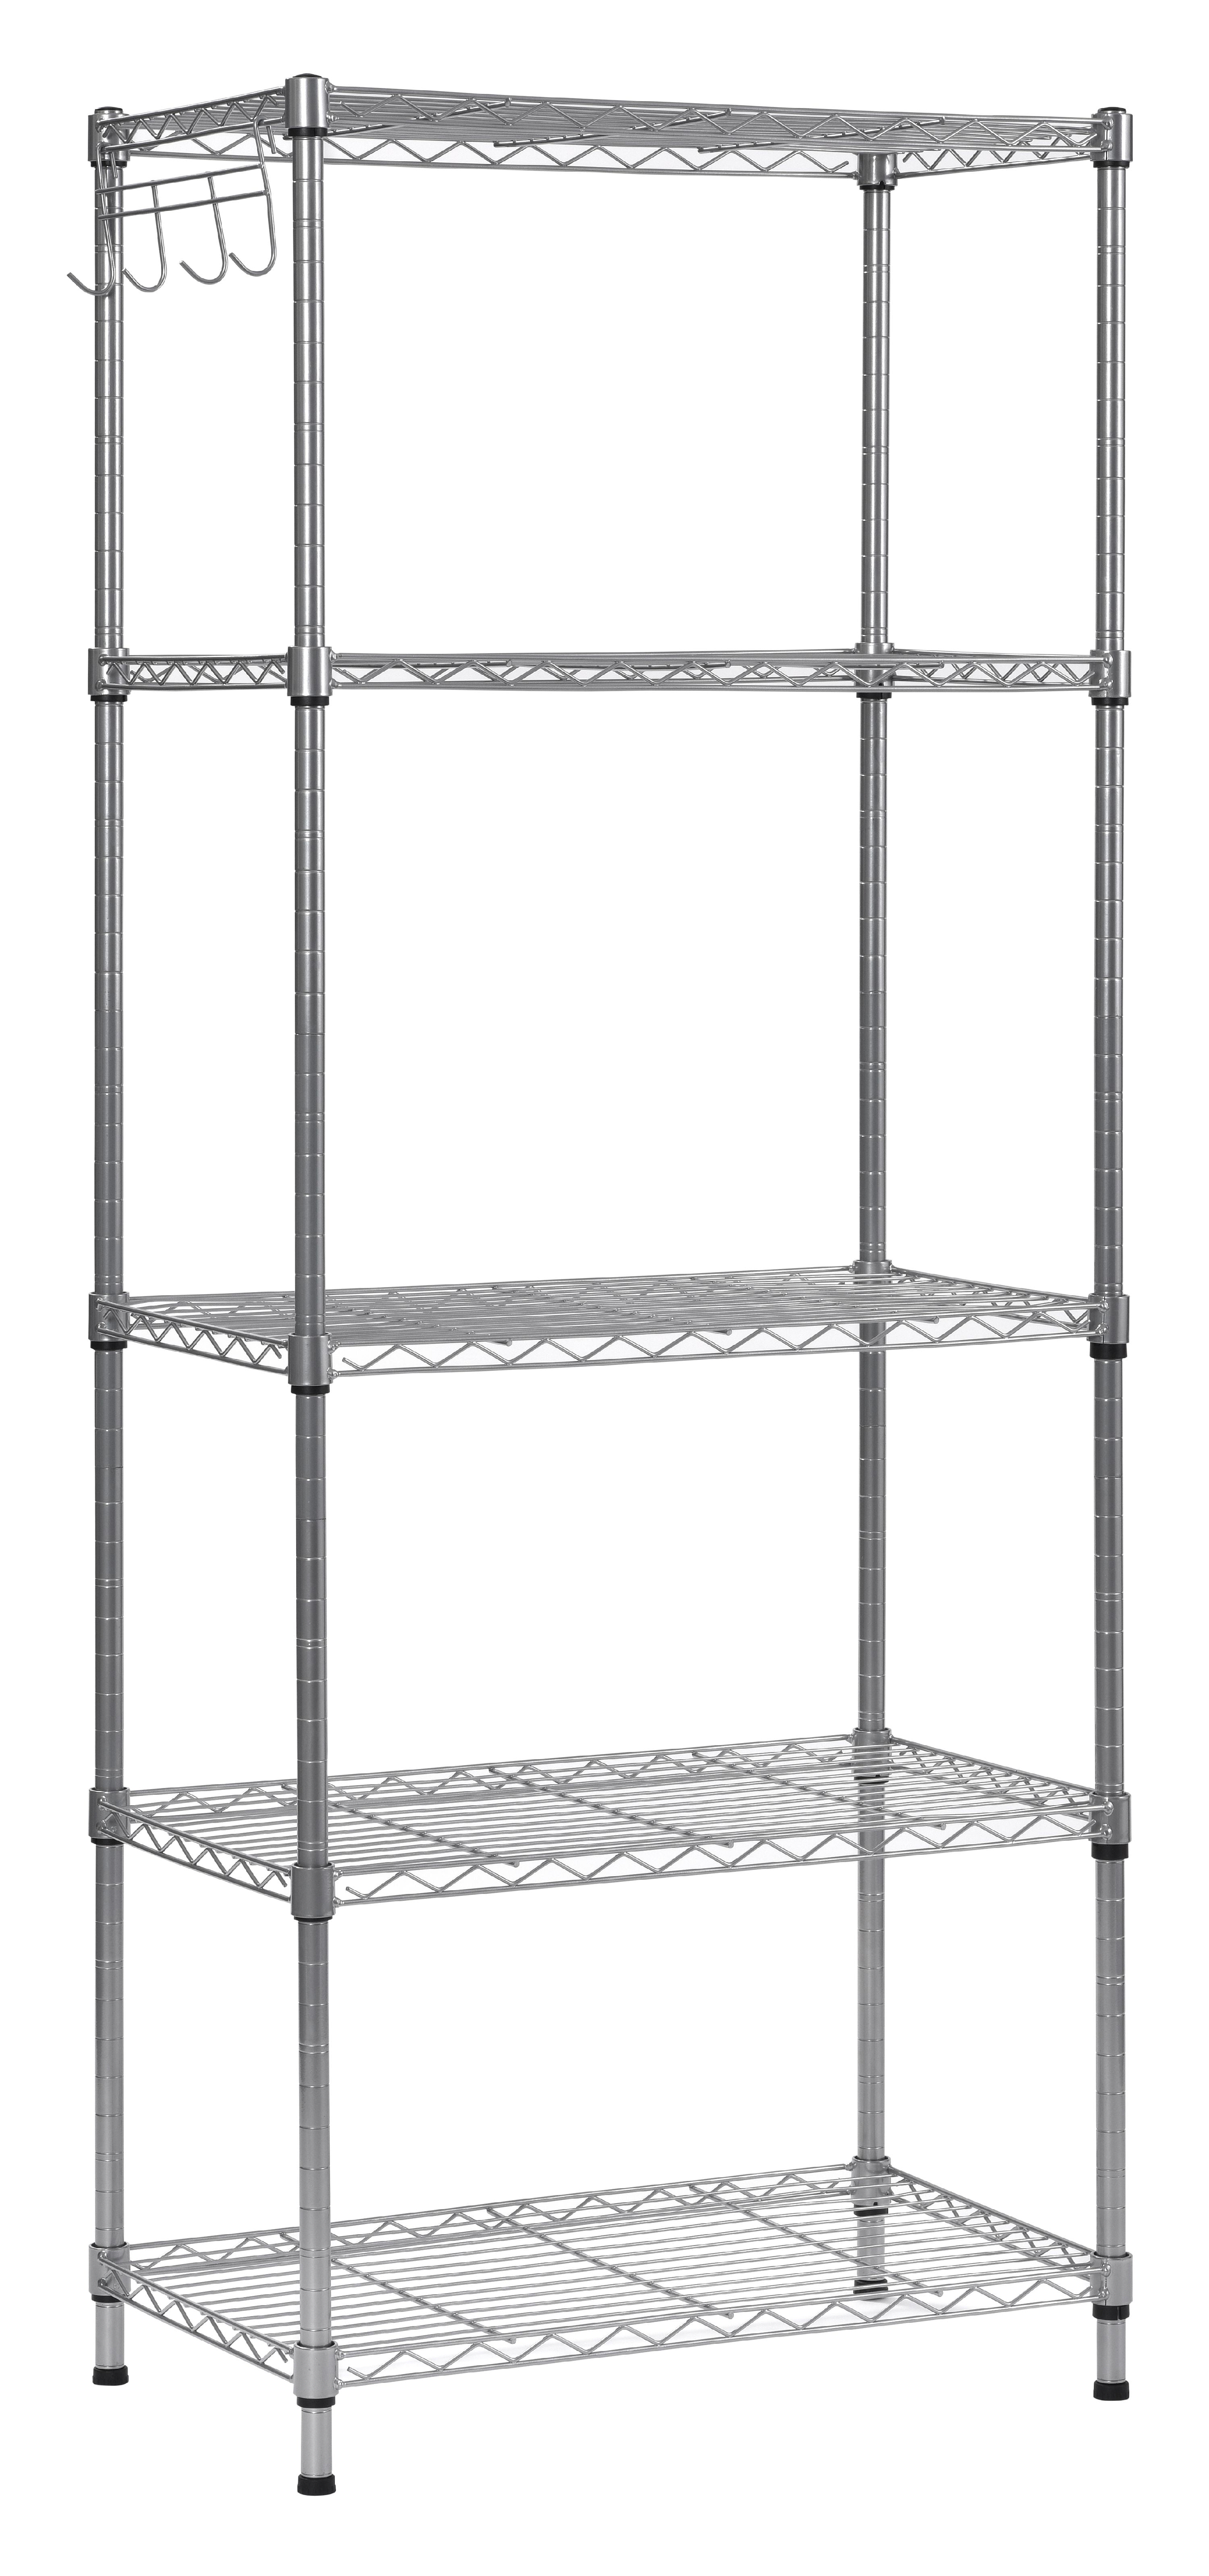 Muscle Rack 5-Shelf Steel Shelving Unit Chose Your Desired Size 